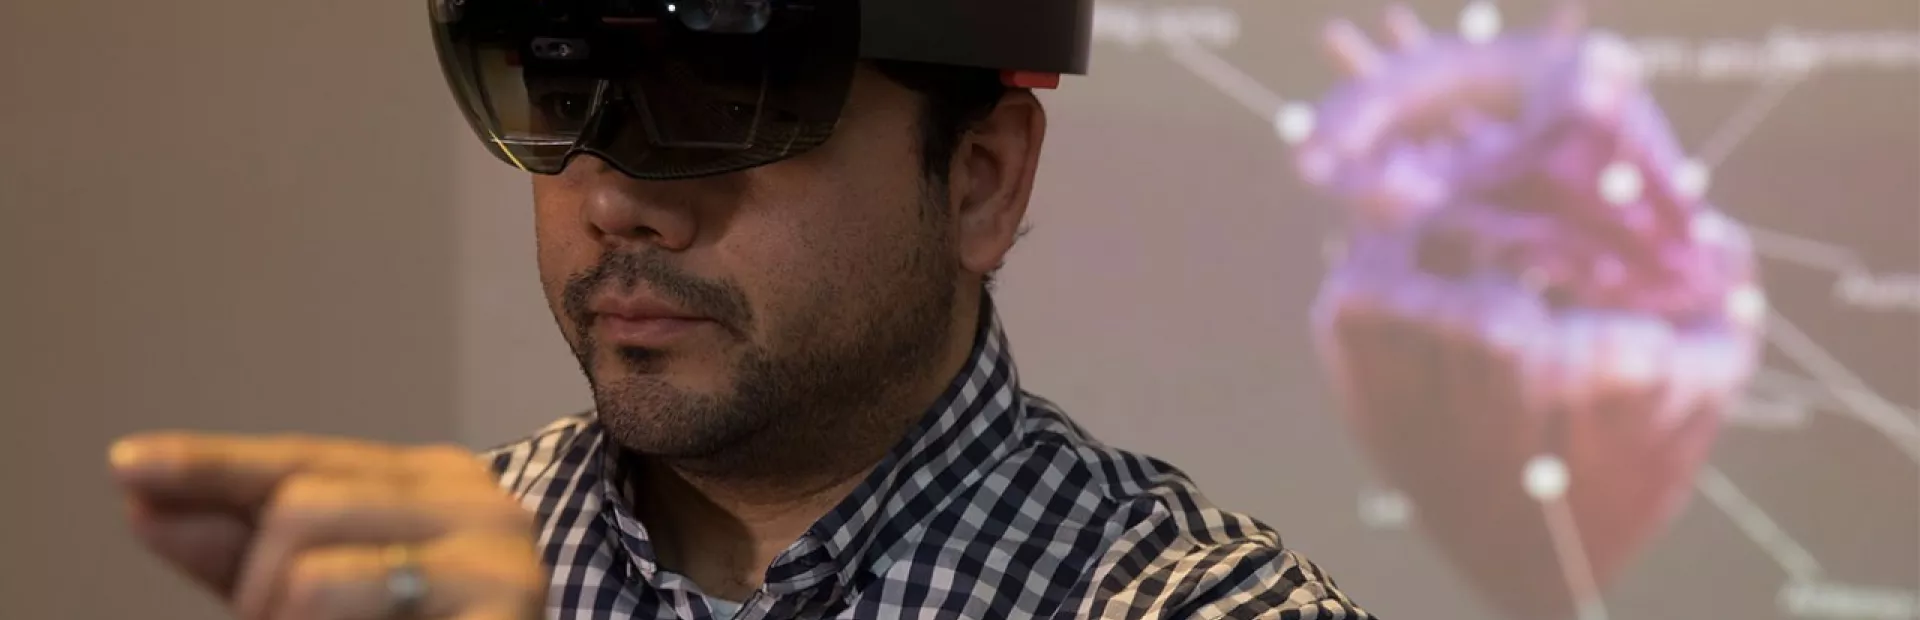 Man wearing AR glasses to manipulate a hologram of a heart